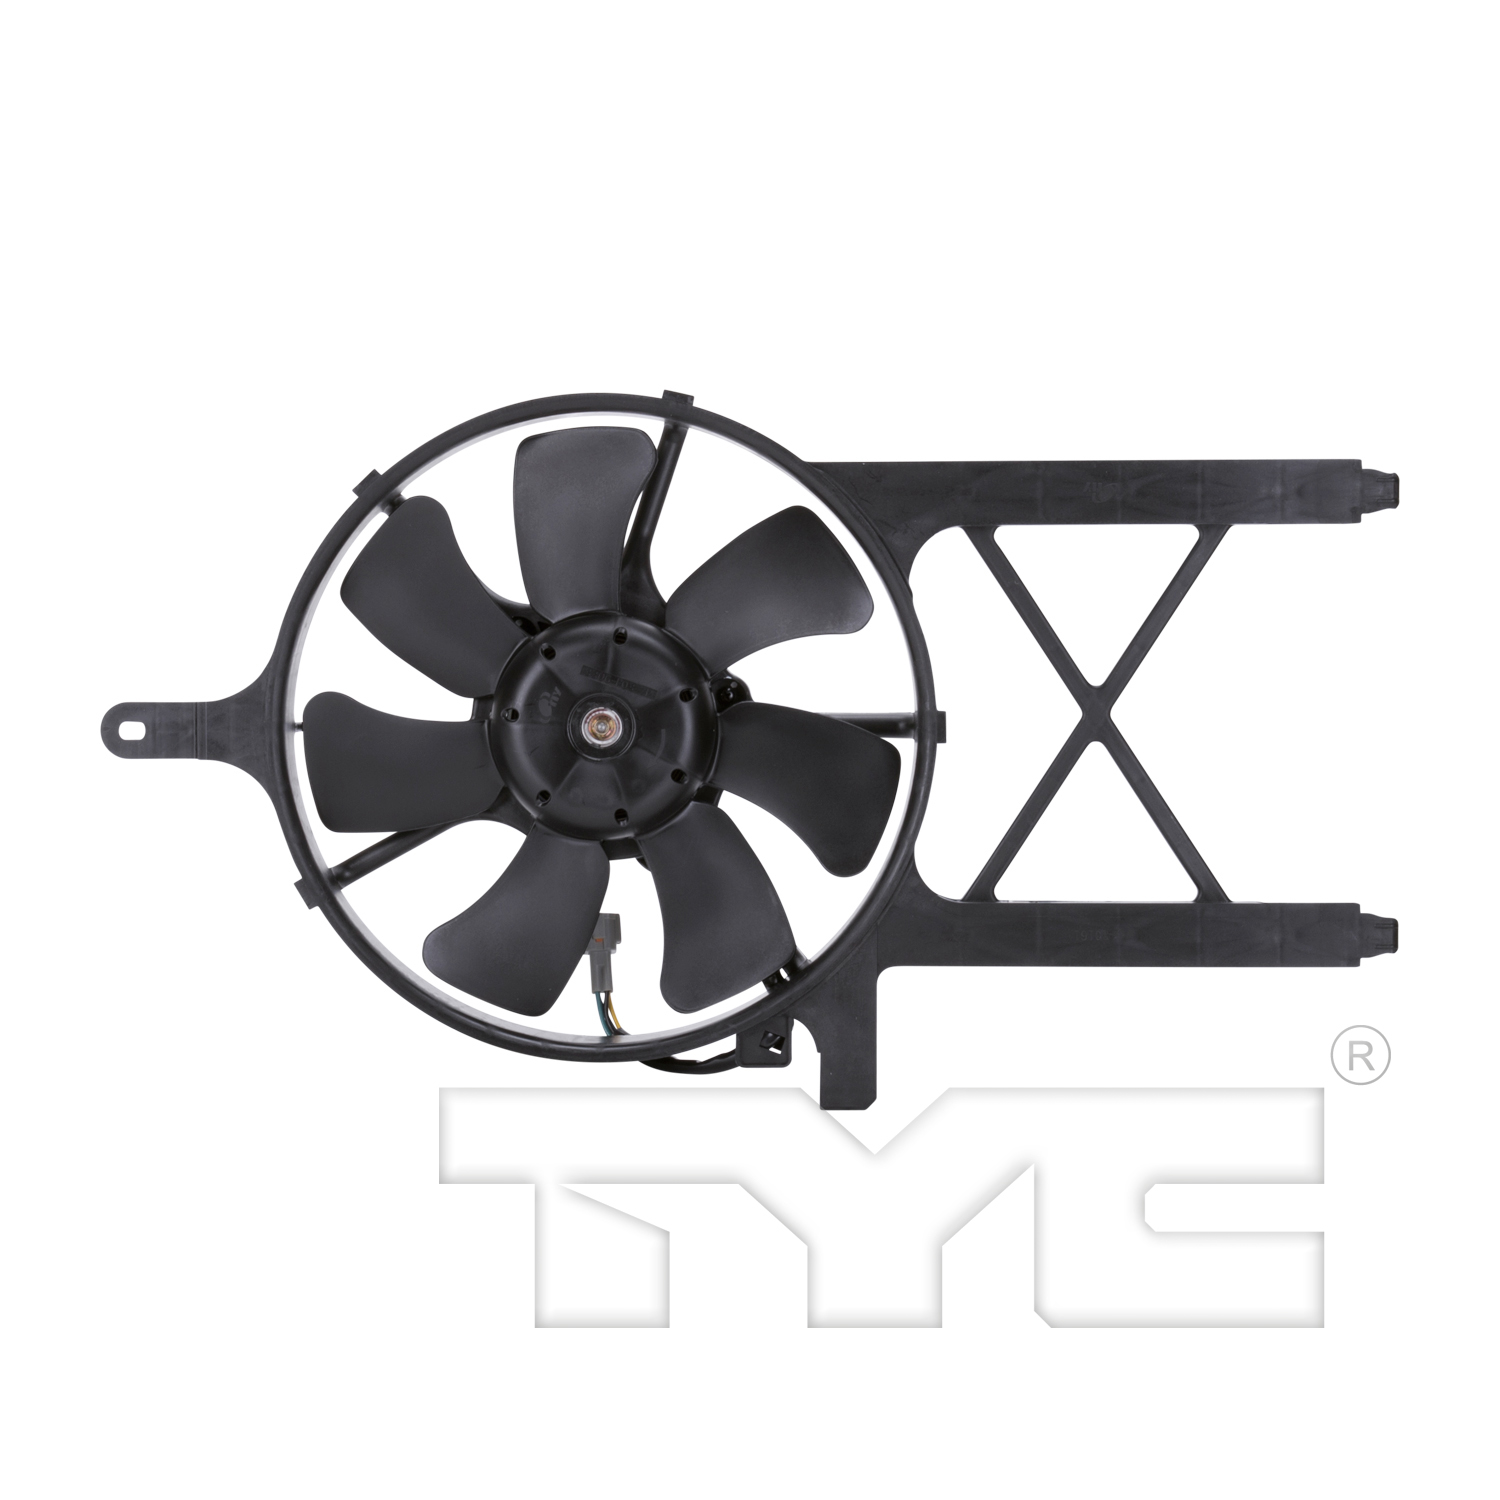 Aftermarket FAN ASSEMBLY/FAN SHROUDS for NISSAN - FRONTIER, FRONTIER,05-06,Air conditioning condenser/fan assy